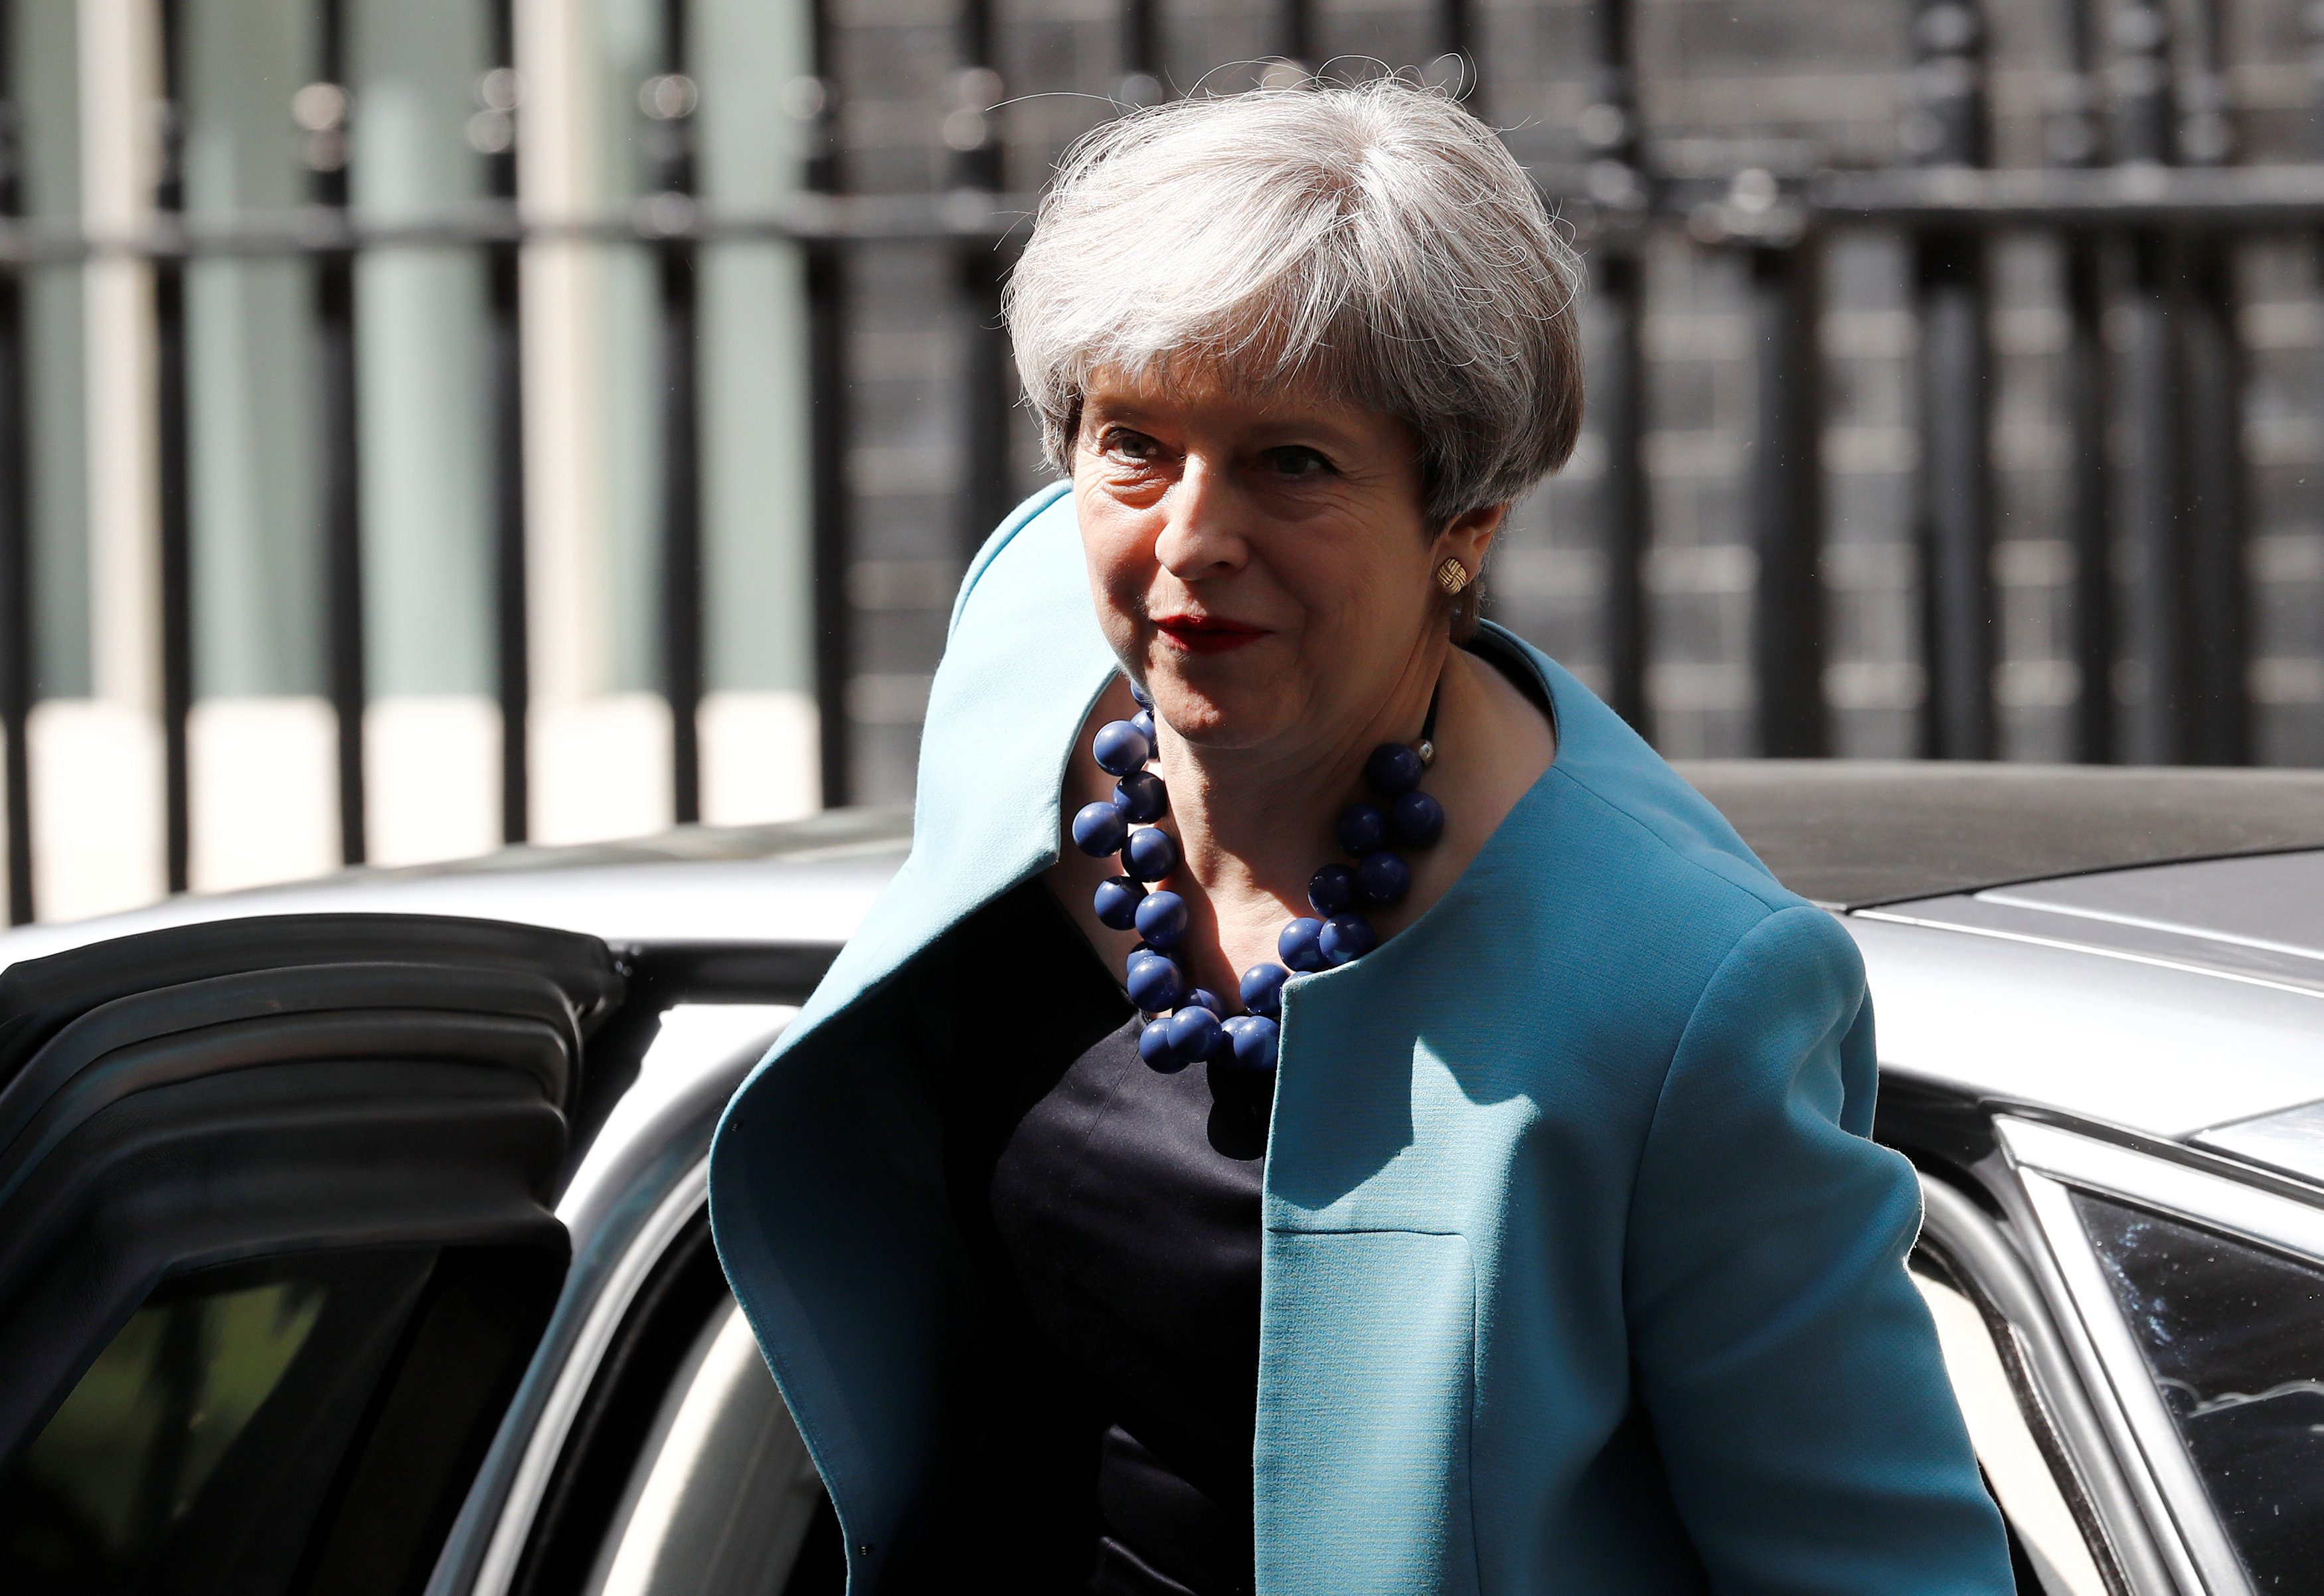 May inches toward deal to stay in power as battle rages over Brexit